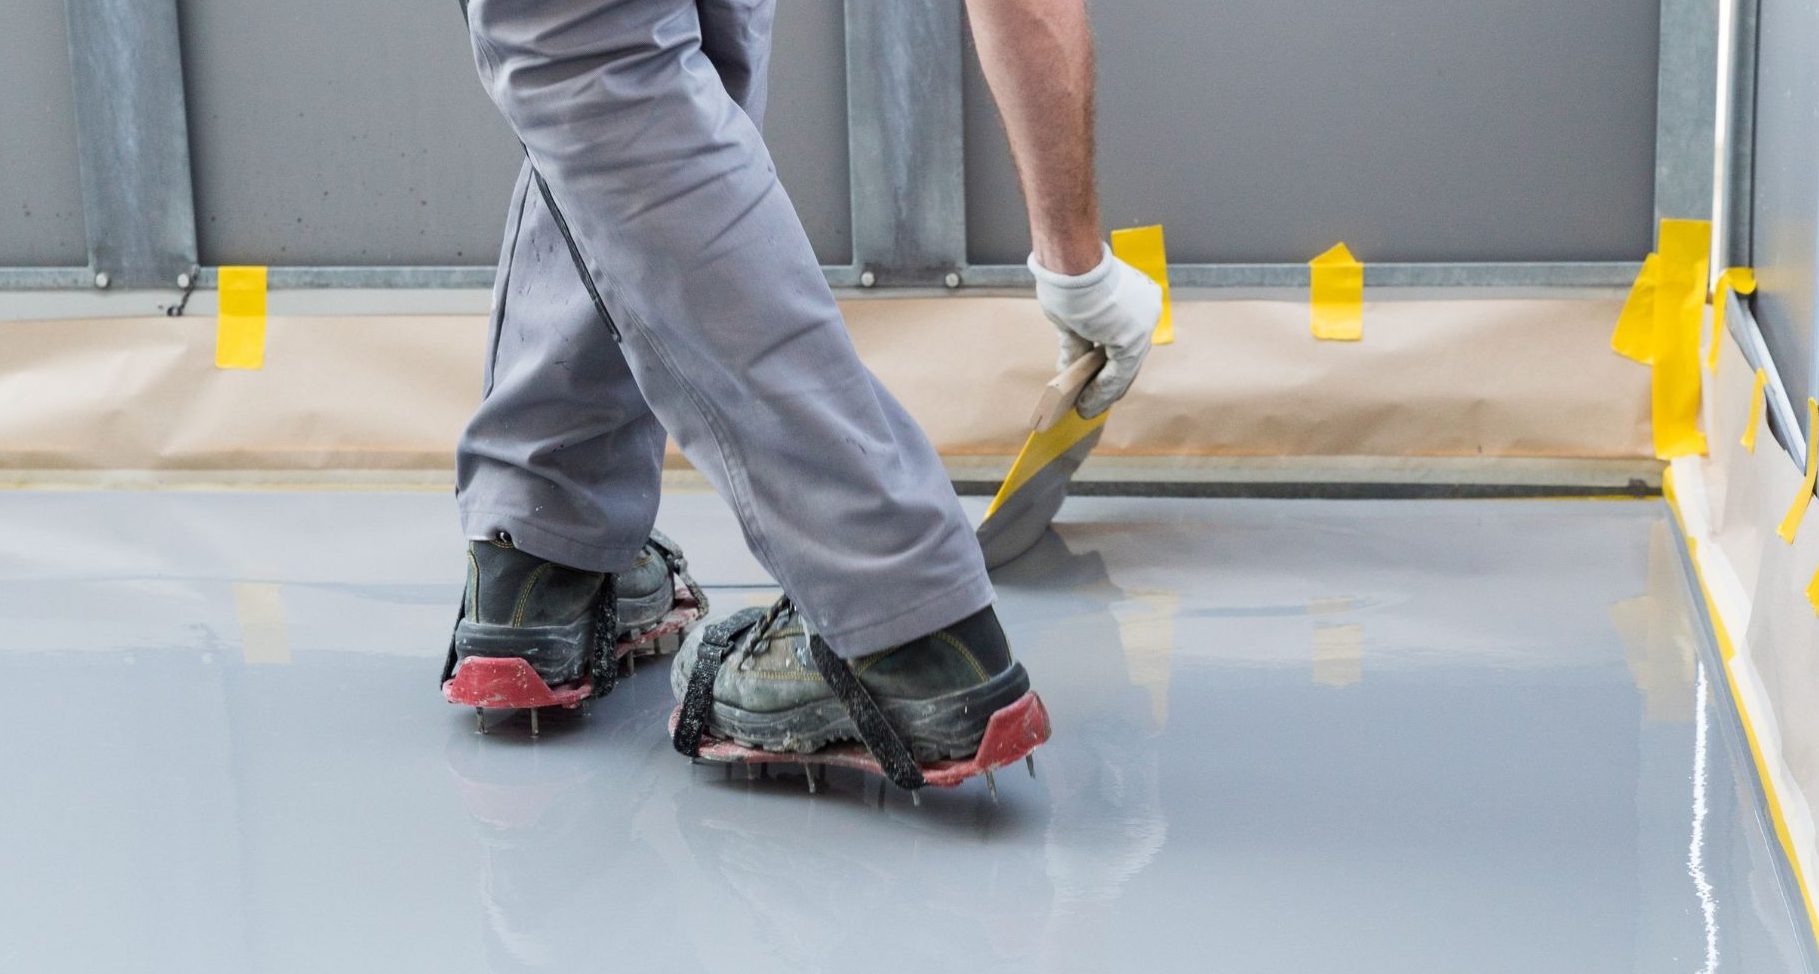 Global Concrete Sealer Market Outlook, Opportunities And Strategies – Includes Concrete Sealer Market Size